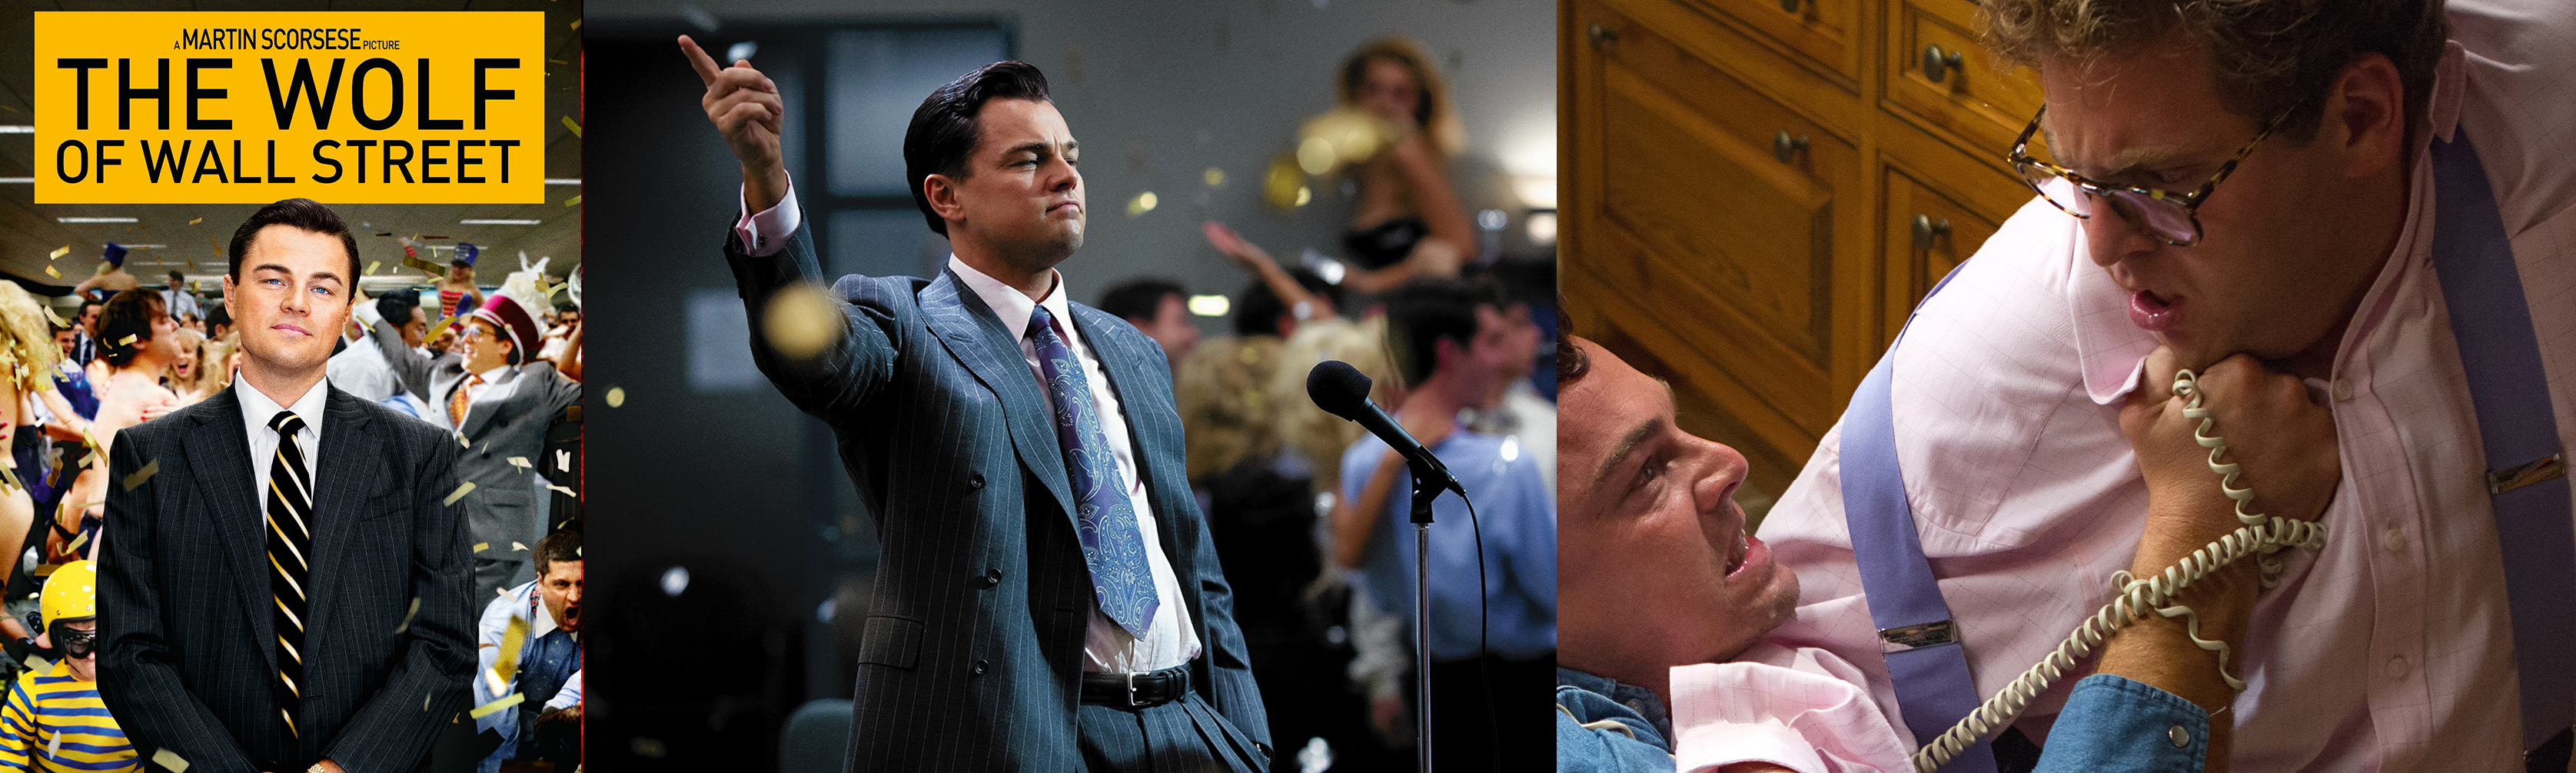 The Wolf of Wall Street (2014) – Movie Review | absolutebadasses3351 x 1005